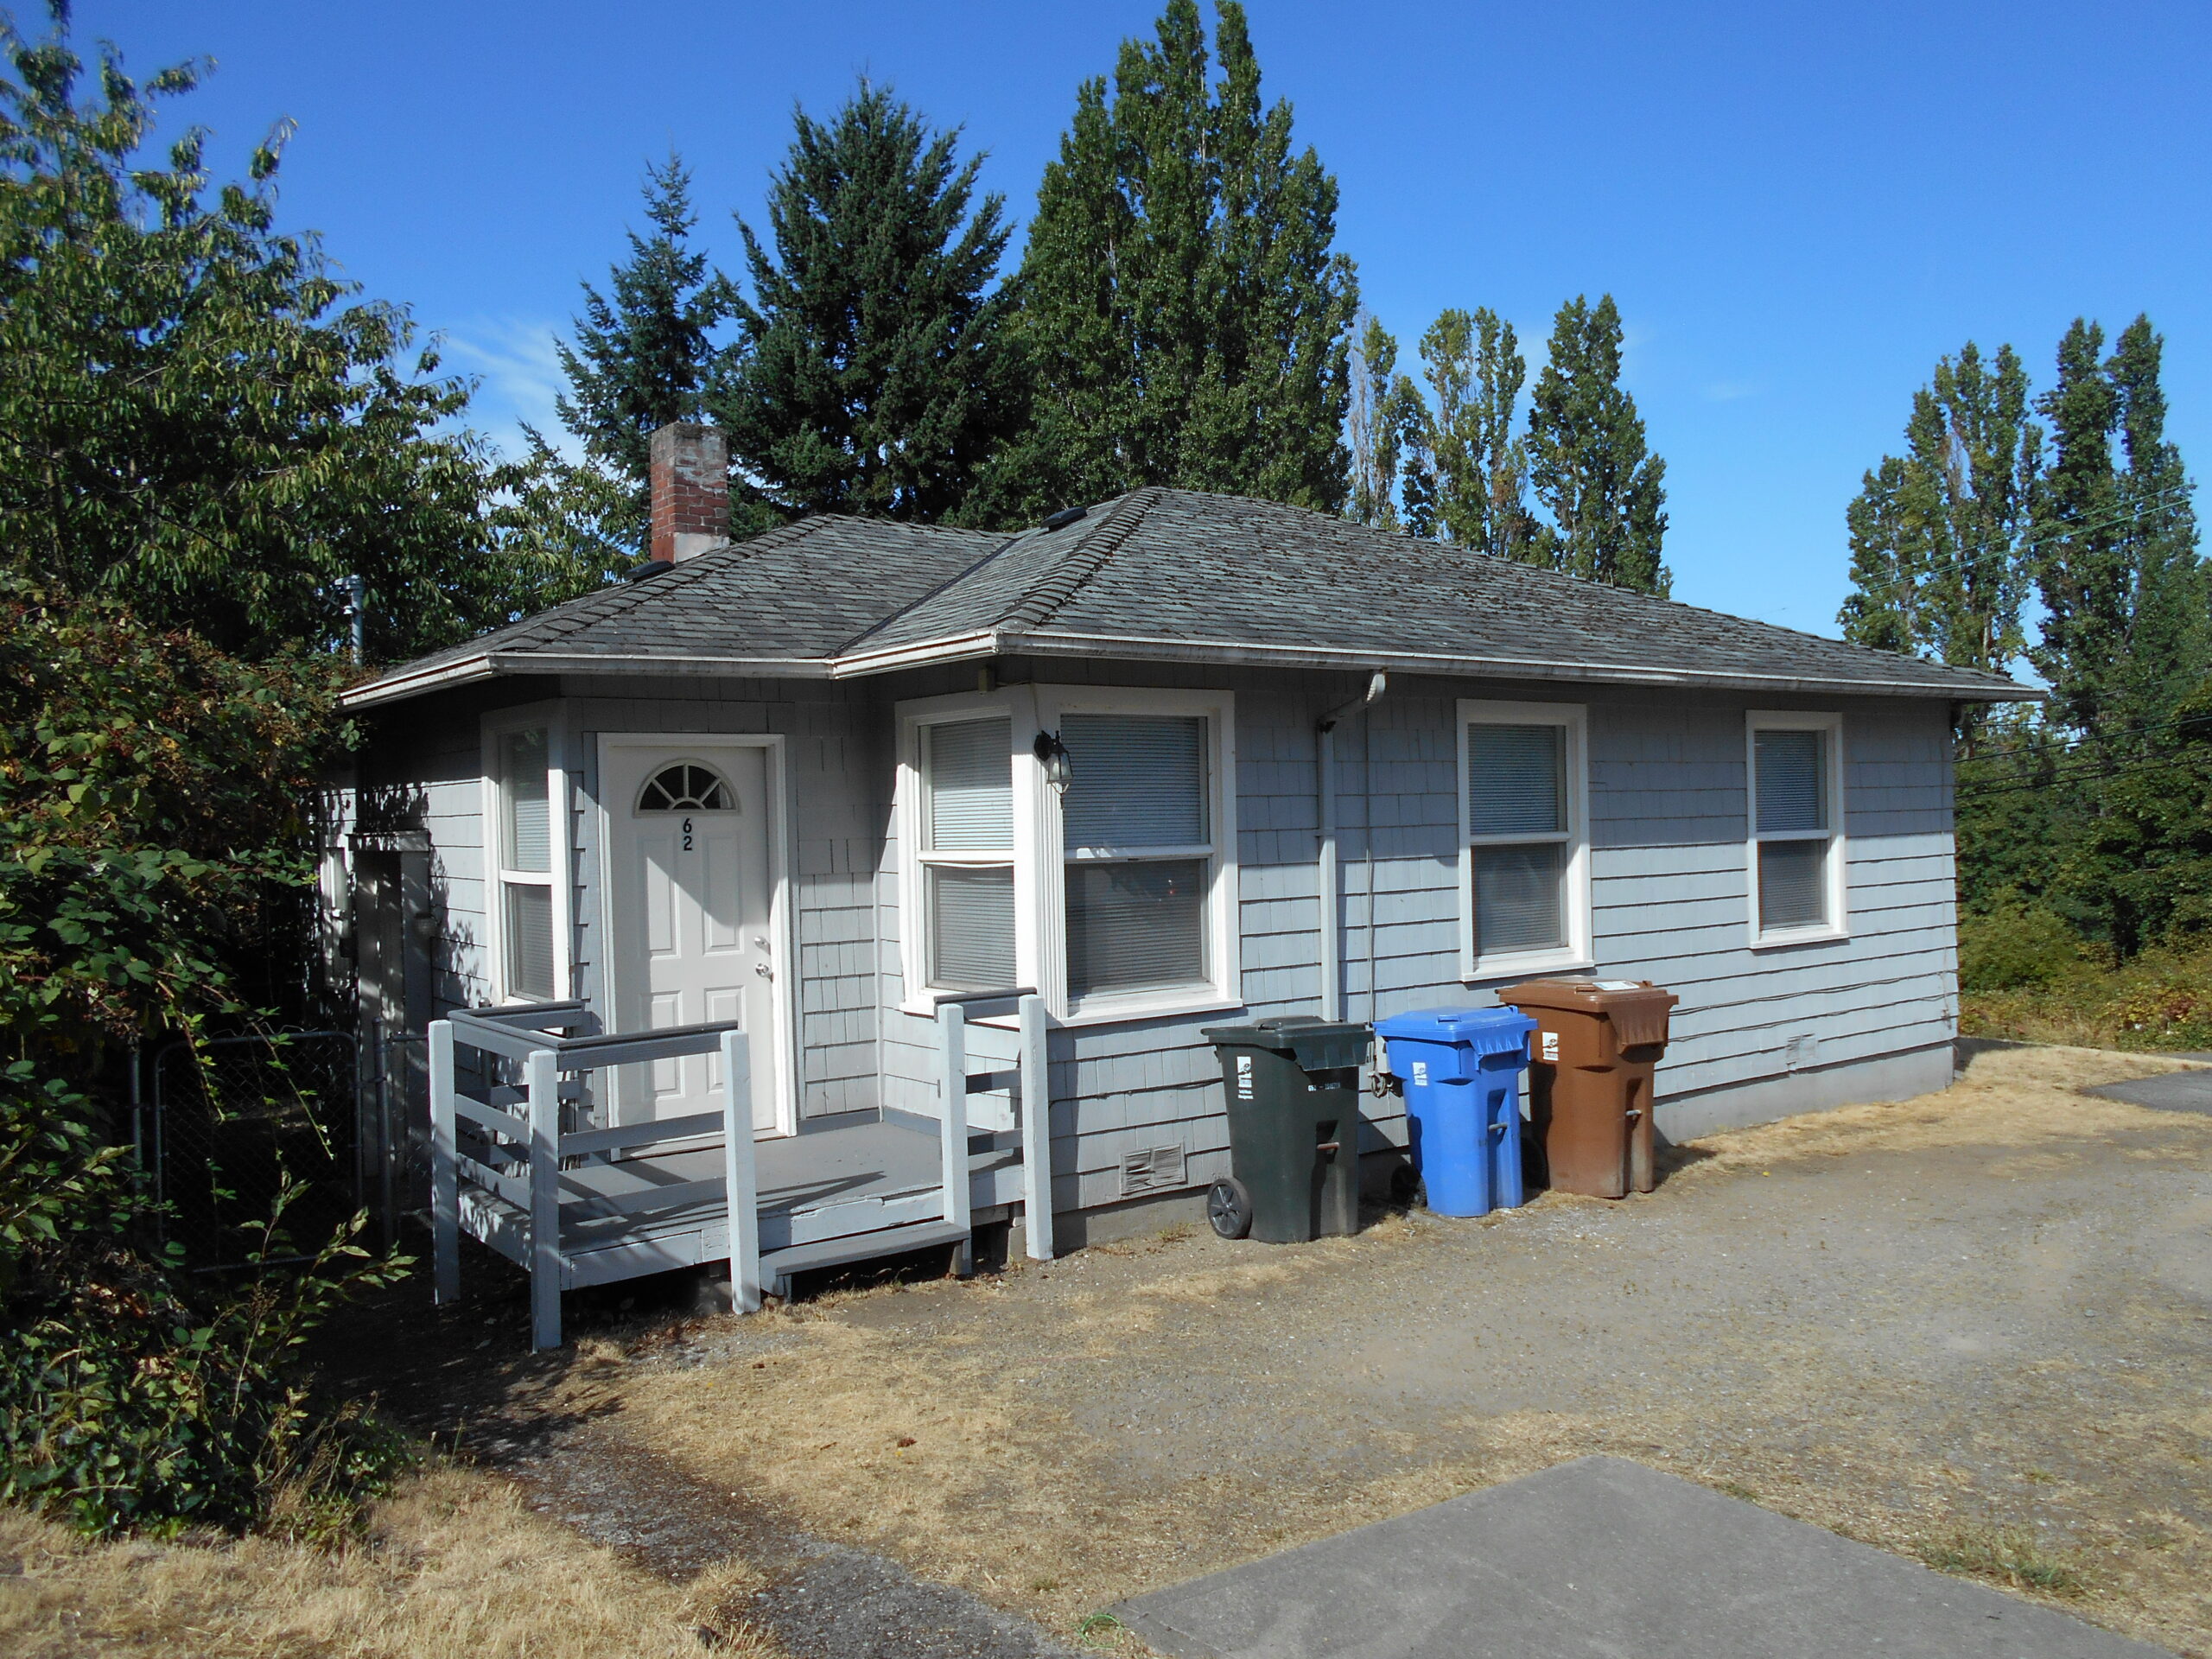 R-62 $1,550 – Remodeled 2 Bedroom House in Tacoma